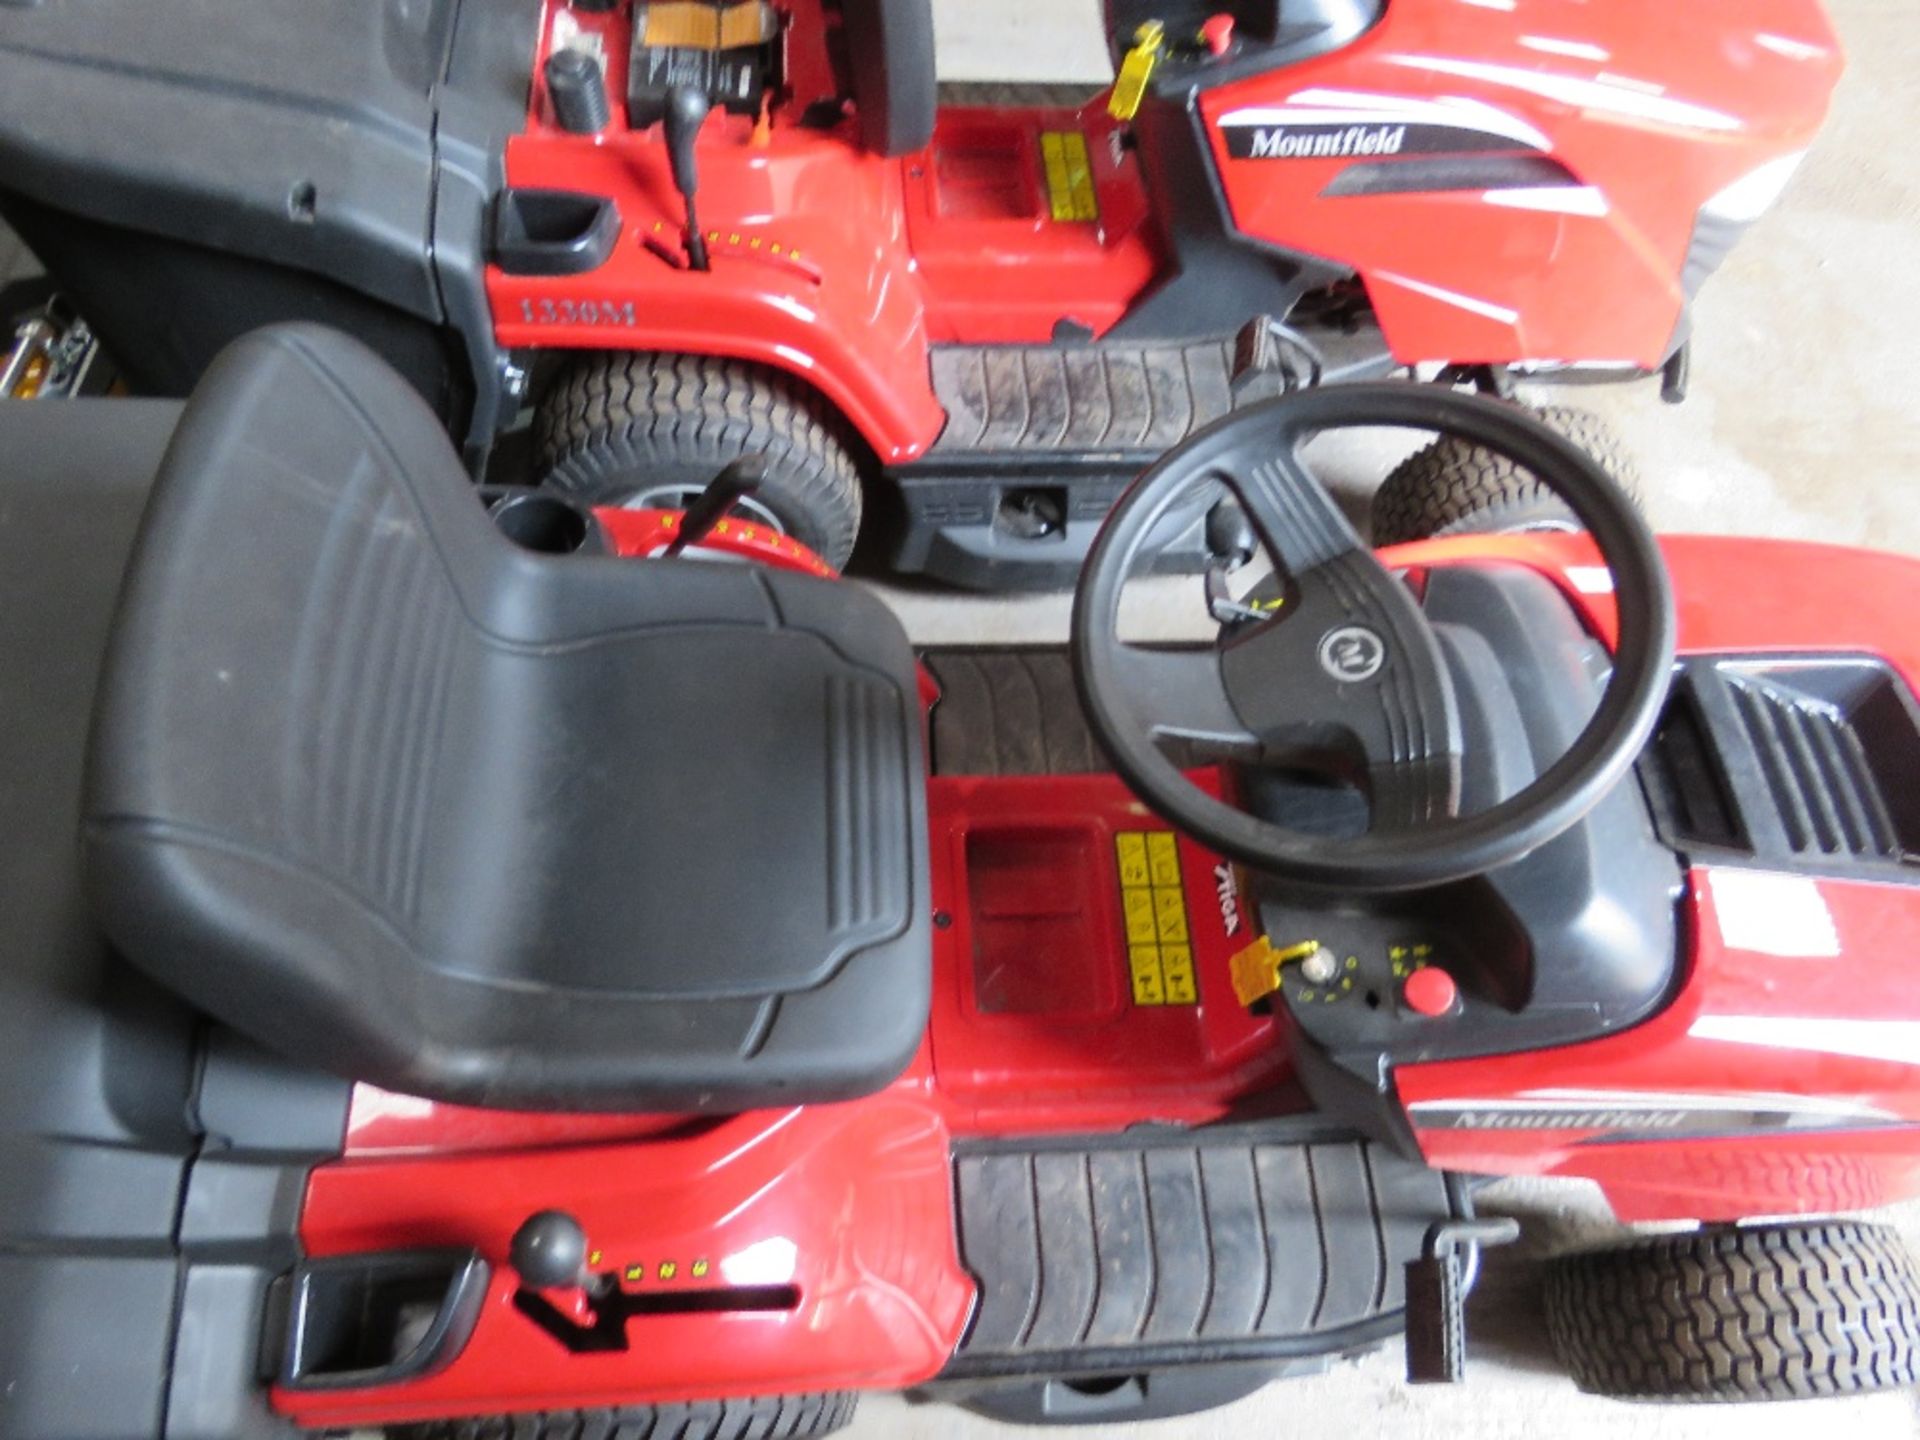 MOUNTFIELD 1330M RIDE ON MOWER WITH COLLECTOR, UNUSED. POWERED BY STIGA ST350 ENGINE. WHEN TESTED WA - Image 6 of 7